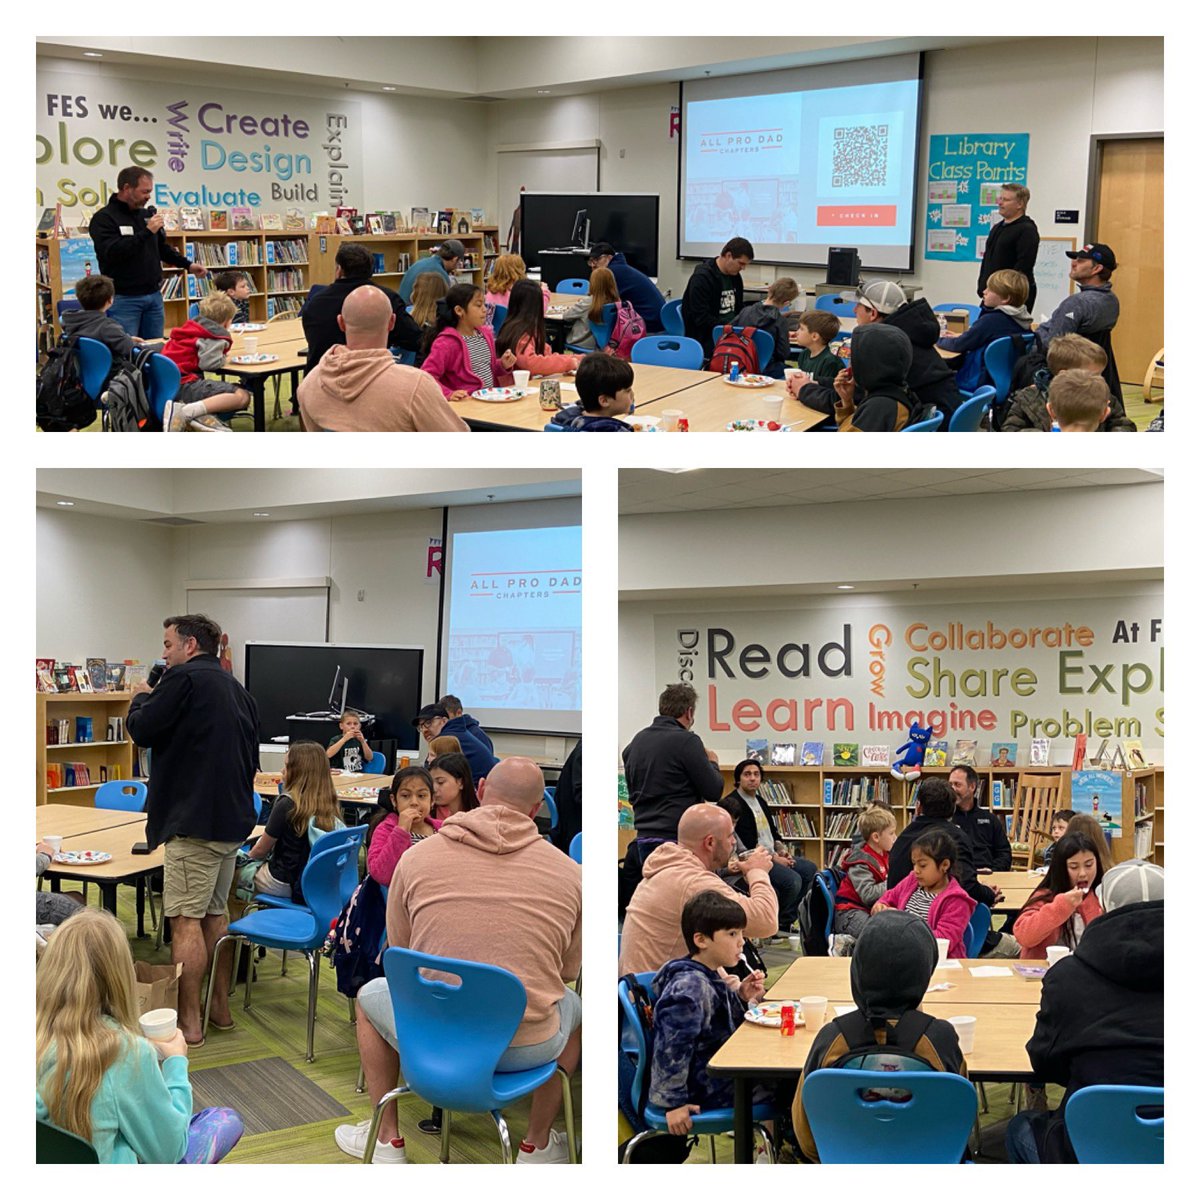 Starting the morning @FabraElem and loving their All Pro Dads monthly gathering! Kindness is on the calendar & on their hearts! #DifferenceMakers #FabraFalcons